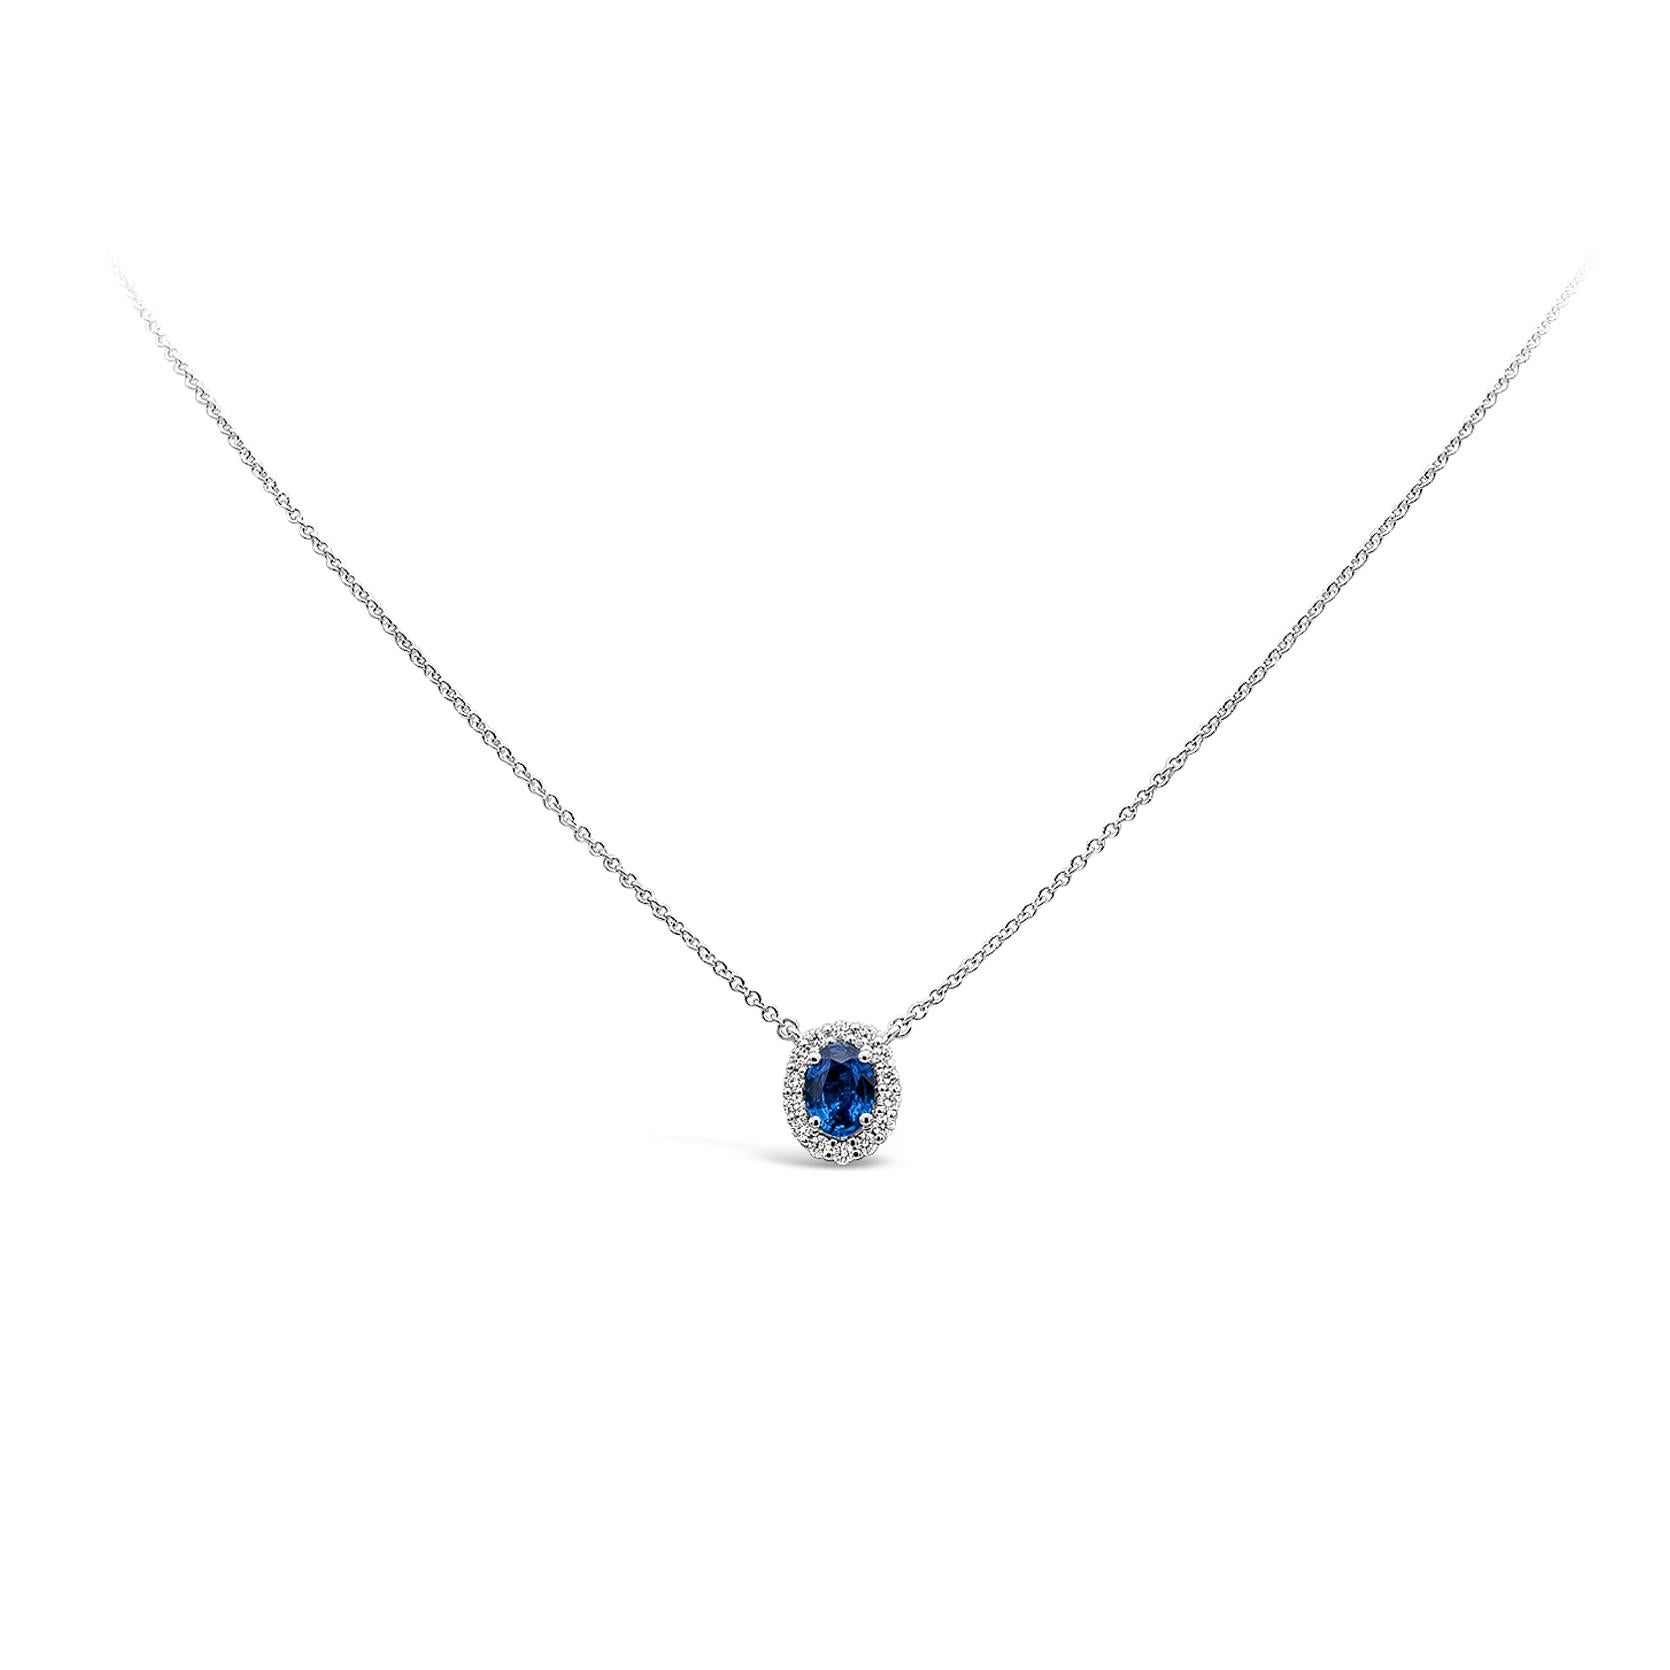 A simple and timeless piece of jewelry, showcasing a 0.73 carat oval cut blue sapphire, surrounded by a single row of round brilliant cut diamonds weighing 0.23 carats total with G color and SI1 clarity. Suspended on an adjustable 18 inches white